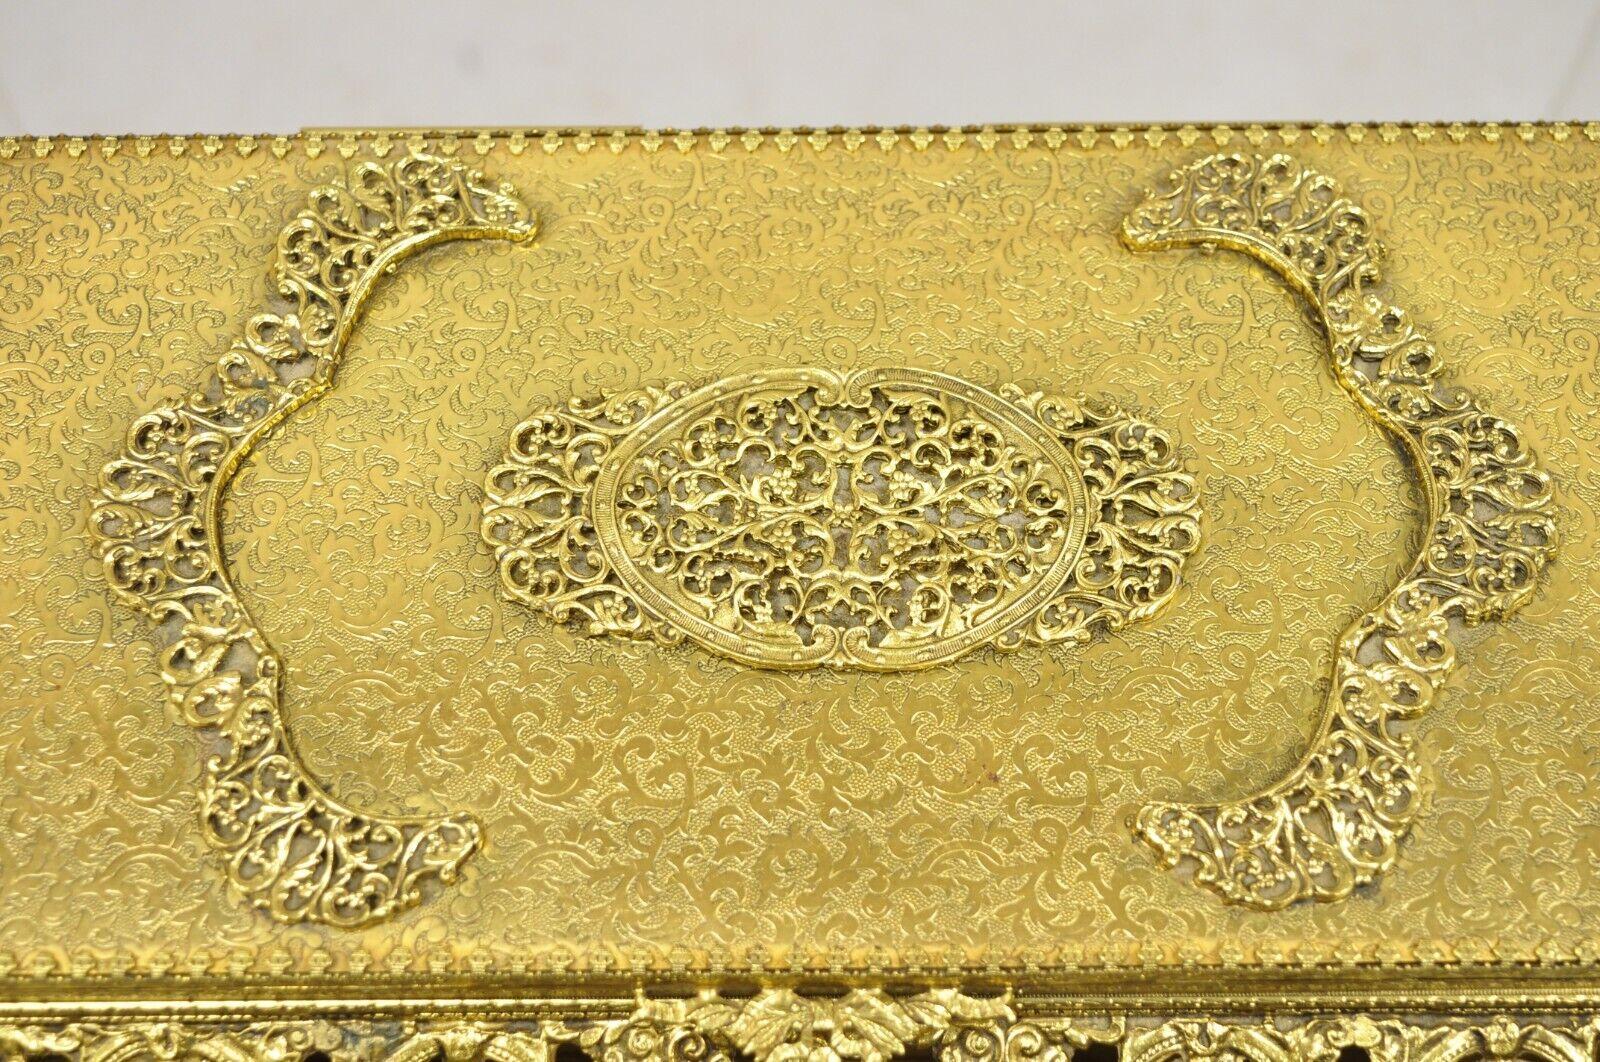 Metal Vtg French Hollywood Regency Style Gold Filigree Vanity Jewelry Box by Globe For Sale